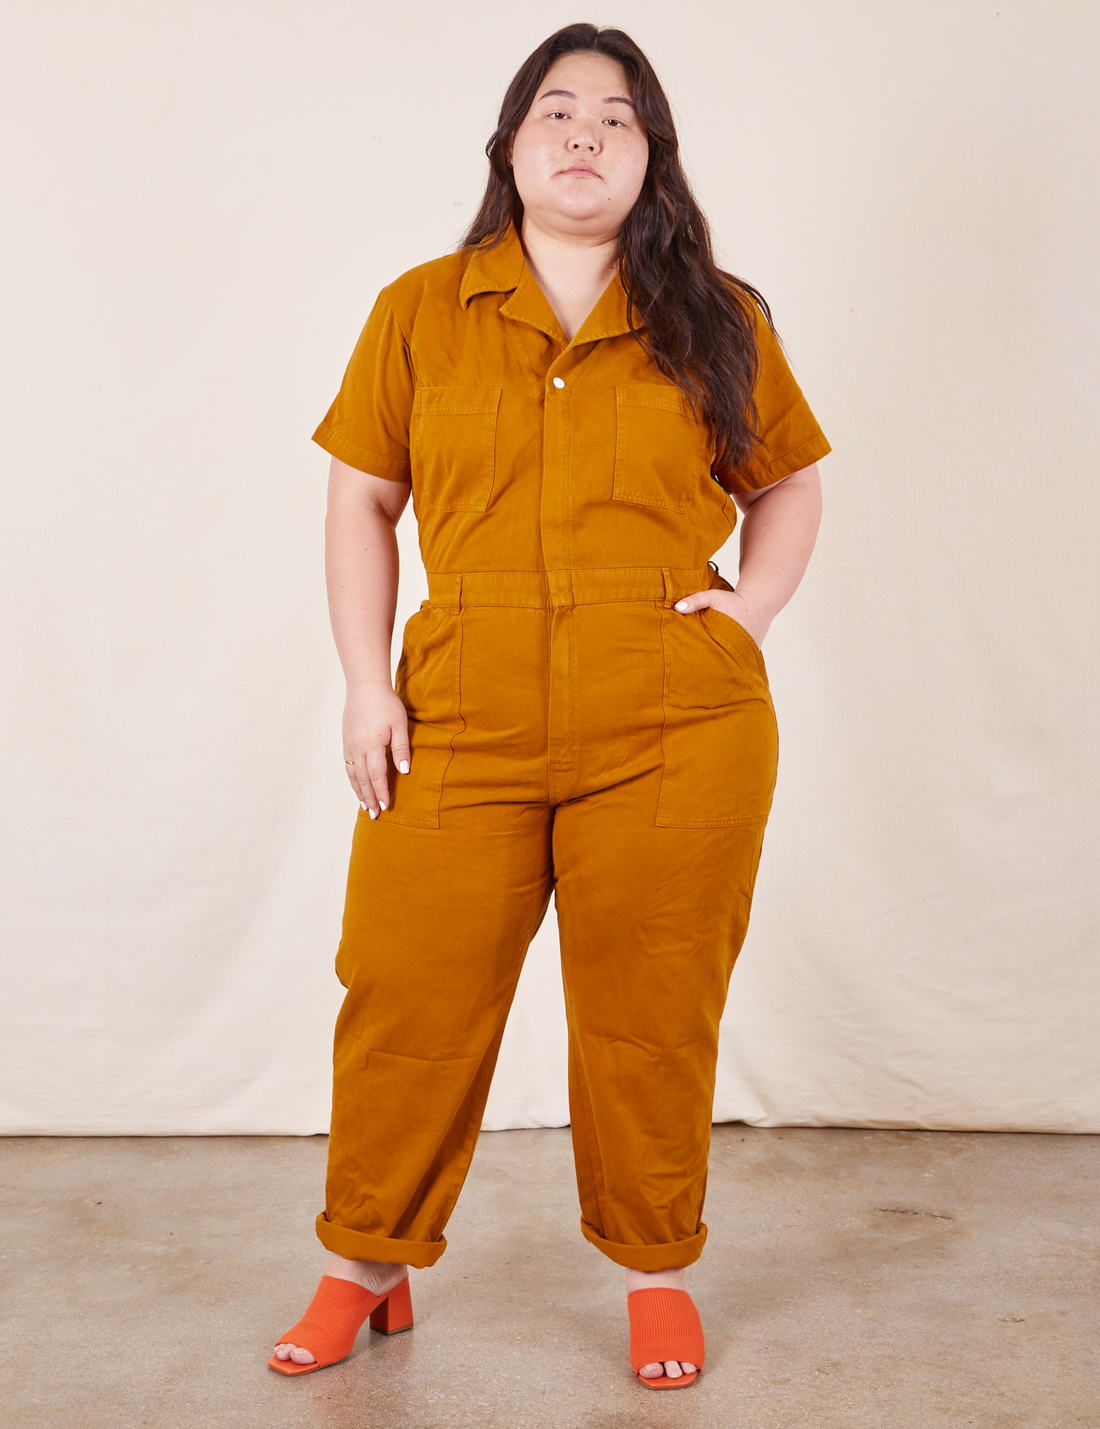 Ashley is 5'7" and wearing 1XL Short Sleeve Jumpsuit in Spicy Mustard